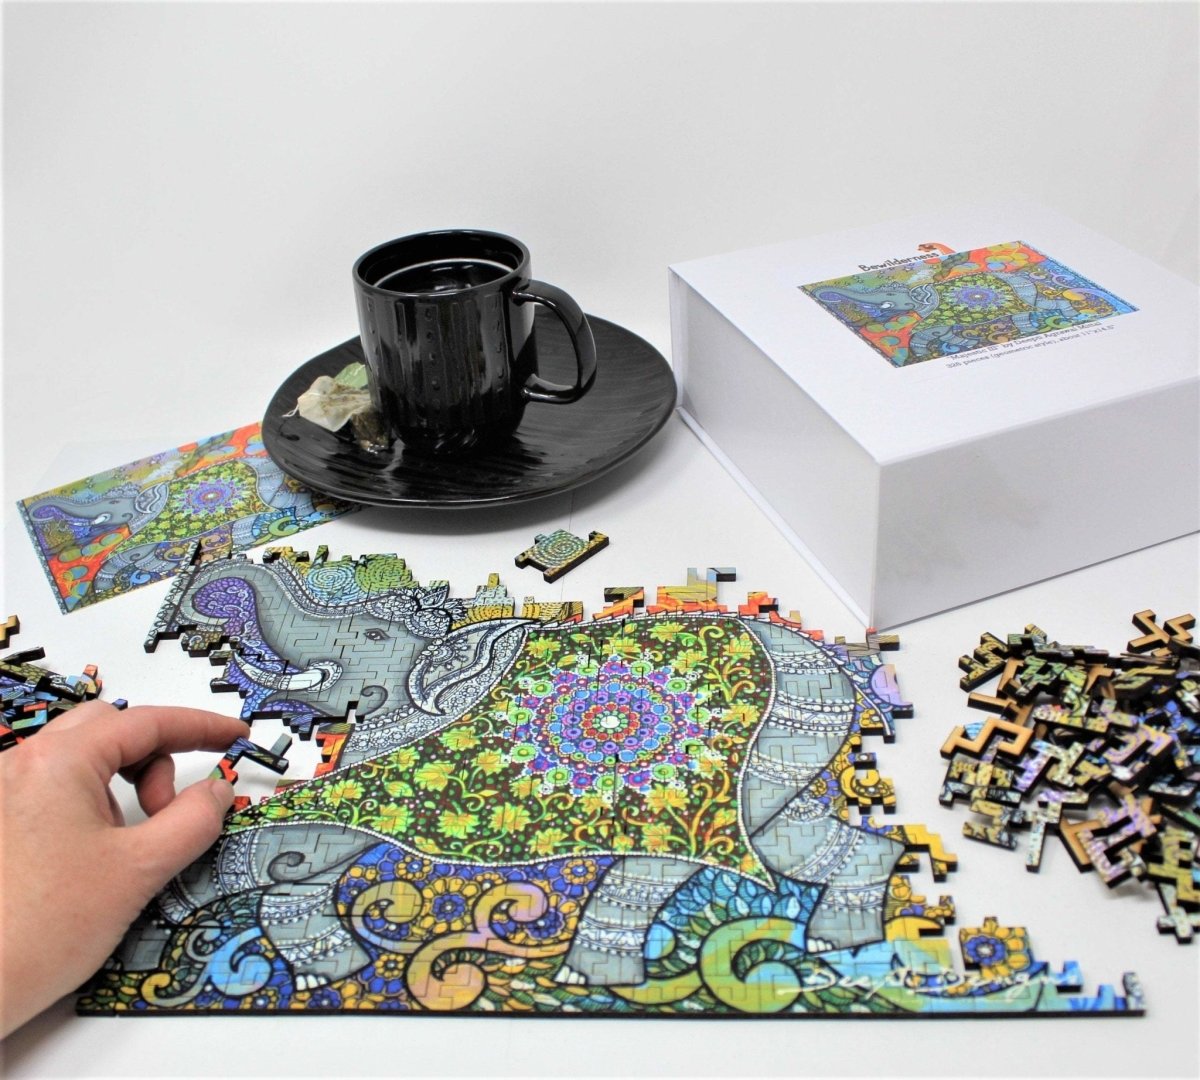 Majestic III colorful puzzle with elephant, by Deepti Designs and Bewilderness, puzzle in progress of assembly